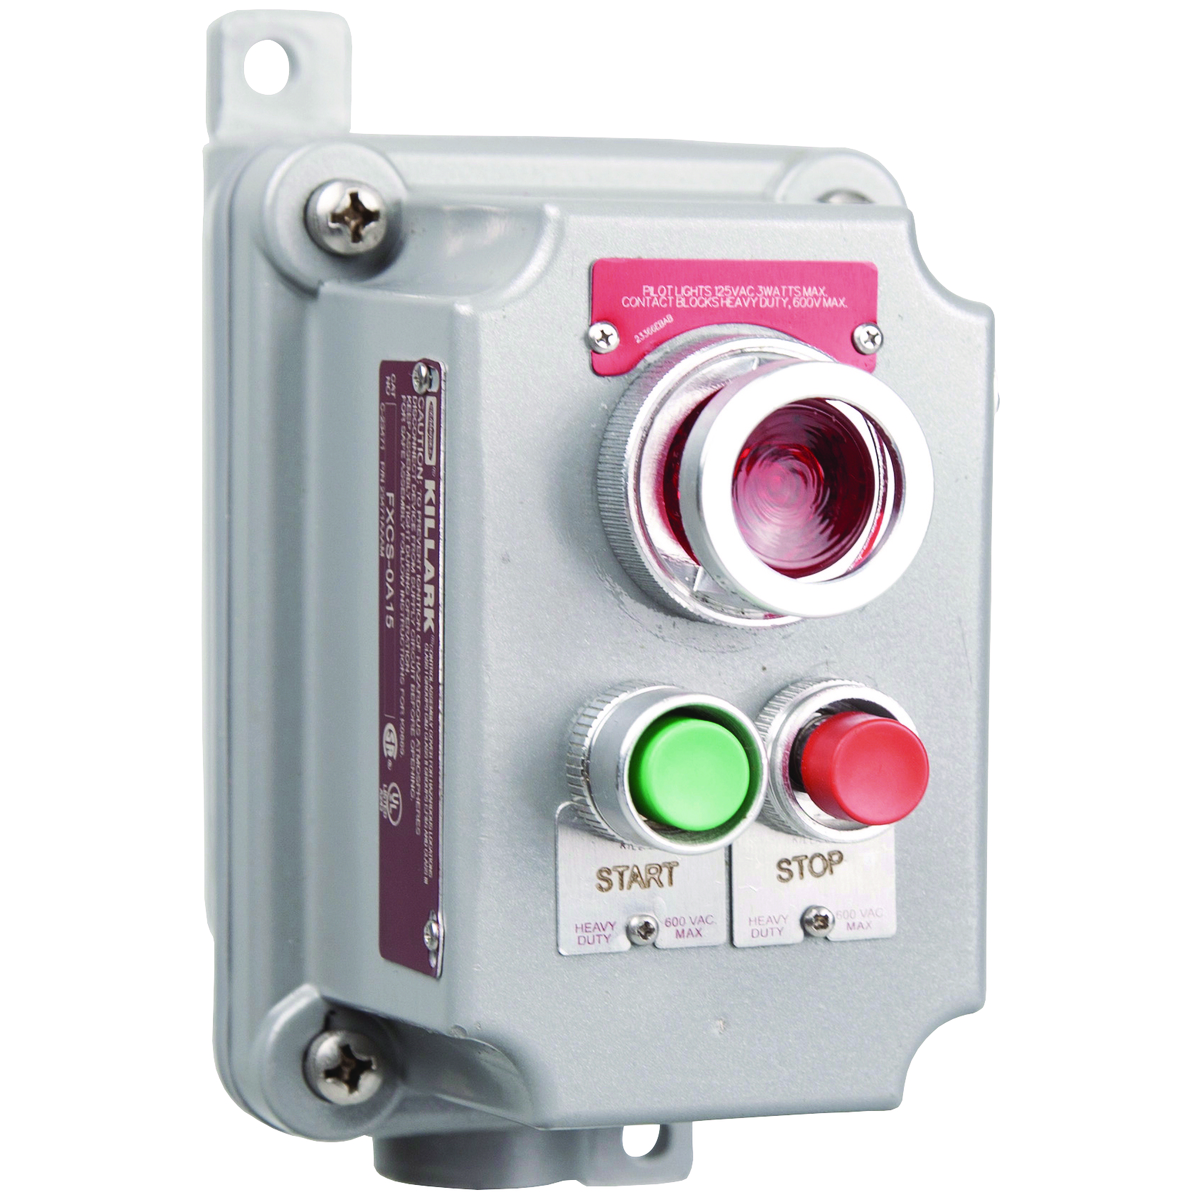 FXCS SERIES - ALUMINUM DEAD-END MOMENTARY CONTACT DOUBLE MINI PUSHBUTTON AND 120V PILOT LIGHT CONTROL STATION - FACTORY SEALED - GREENBUTTON WITH 